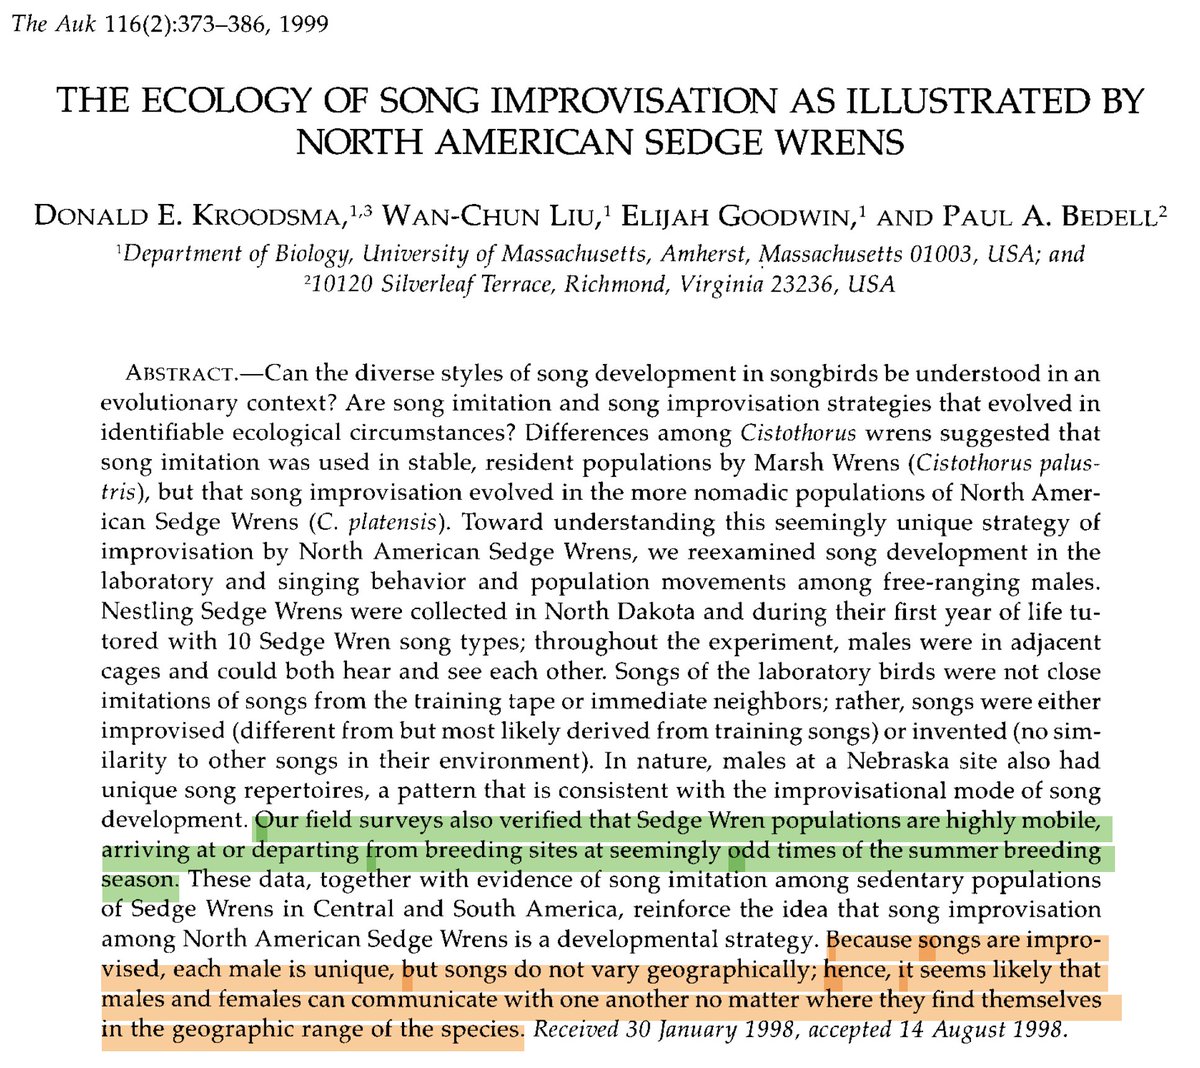 Read this abstract if you love birds and their songs.